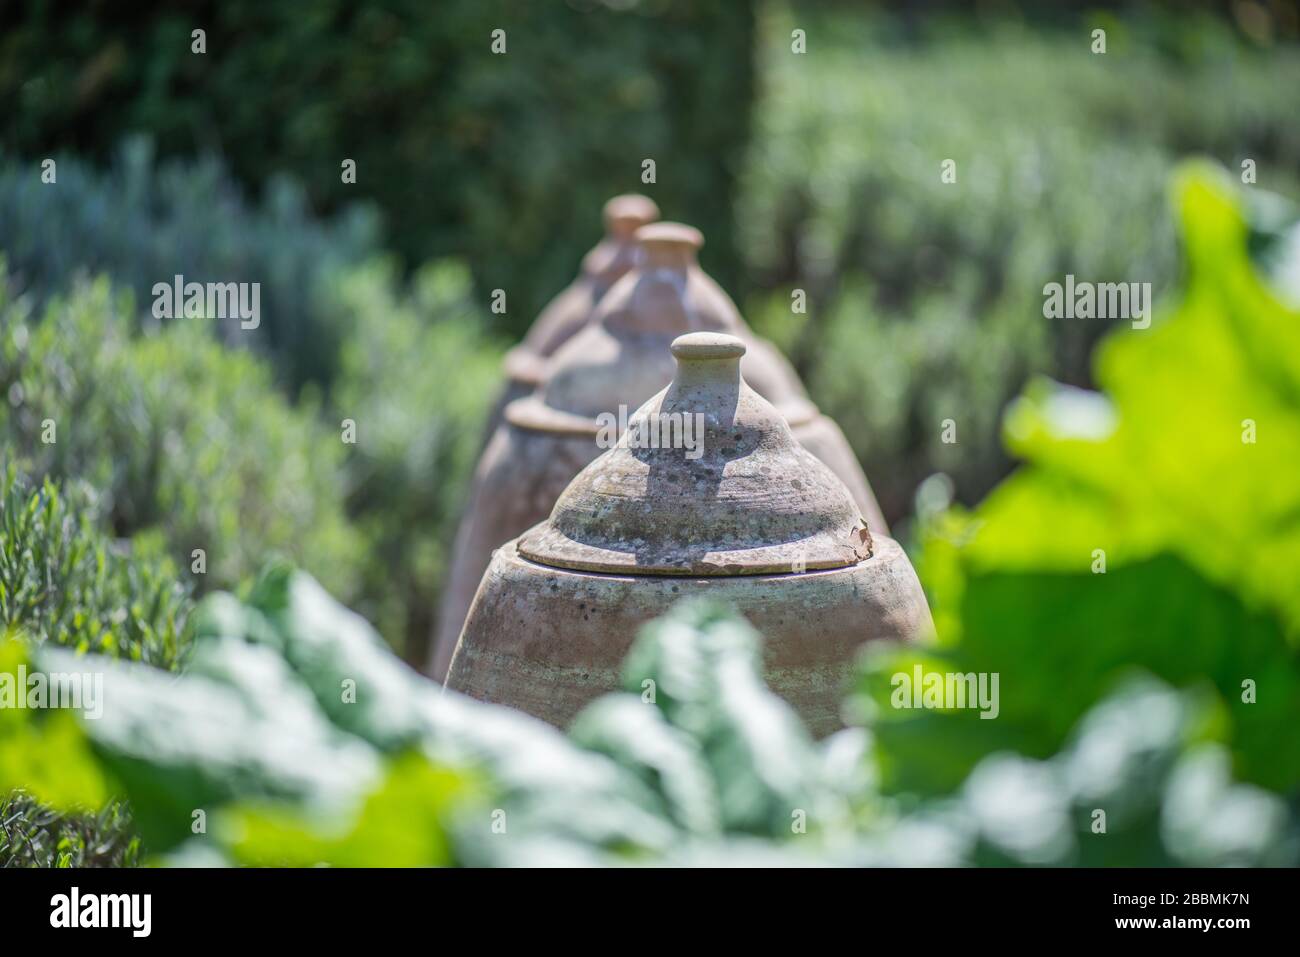 English country garden. Terracotta forcing jars in a cottage garden. Towcester, Northamptonshire, UK Stock Photo